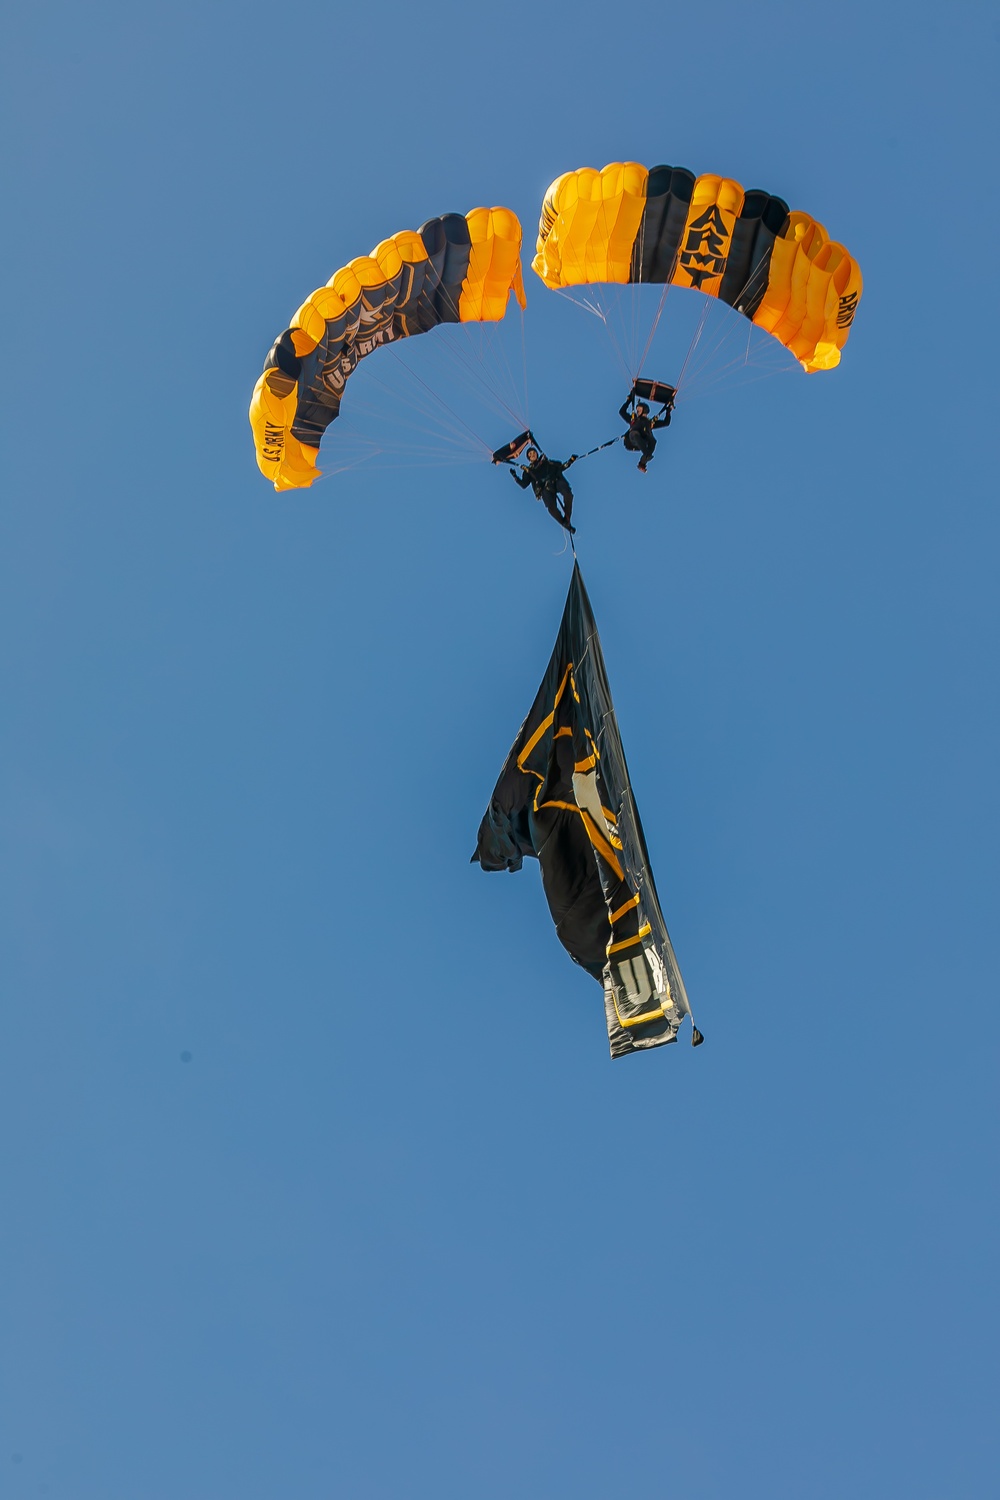 U.S. Army Parachute Team jumps at Great Pacific Airshow